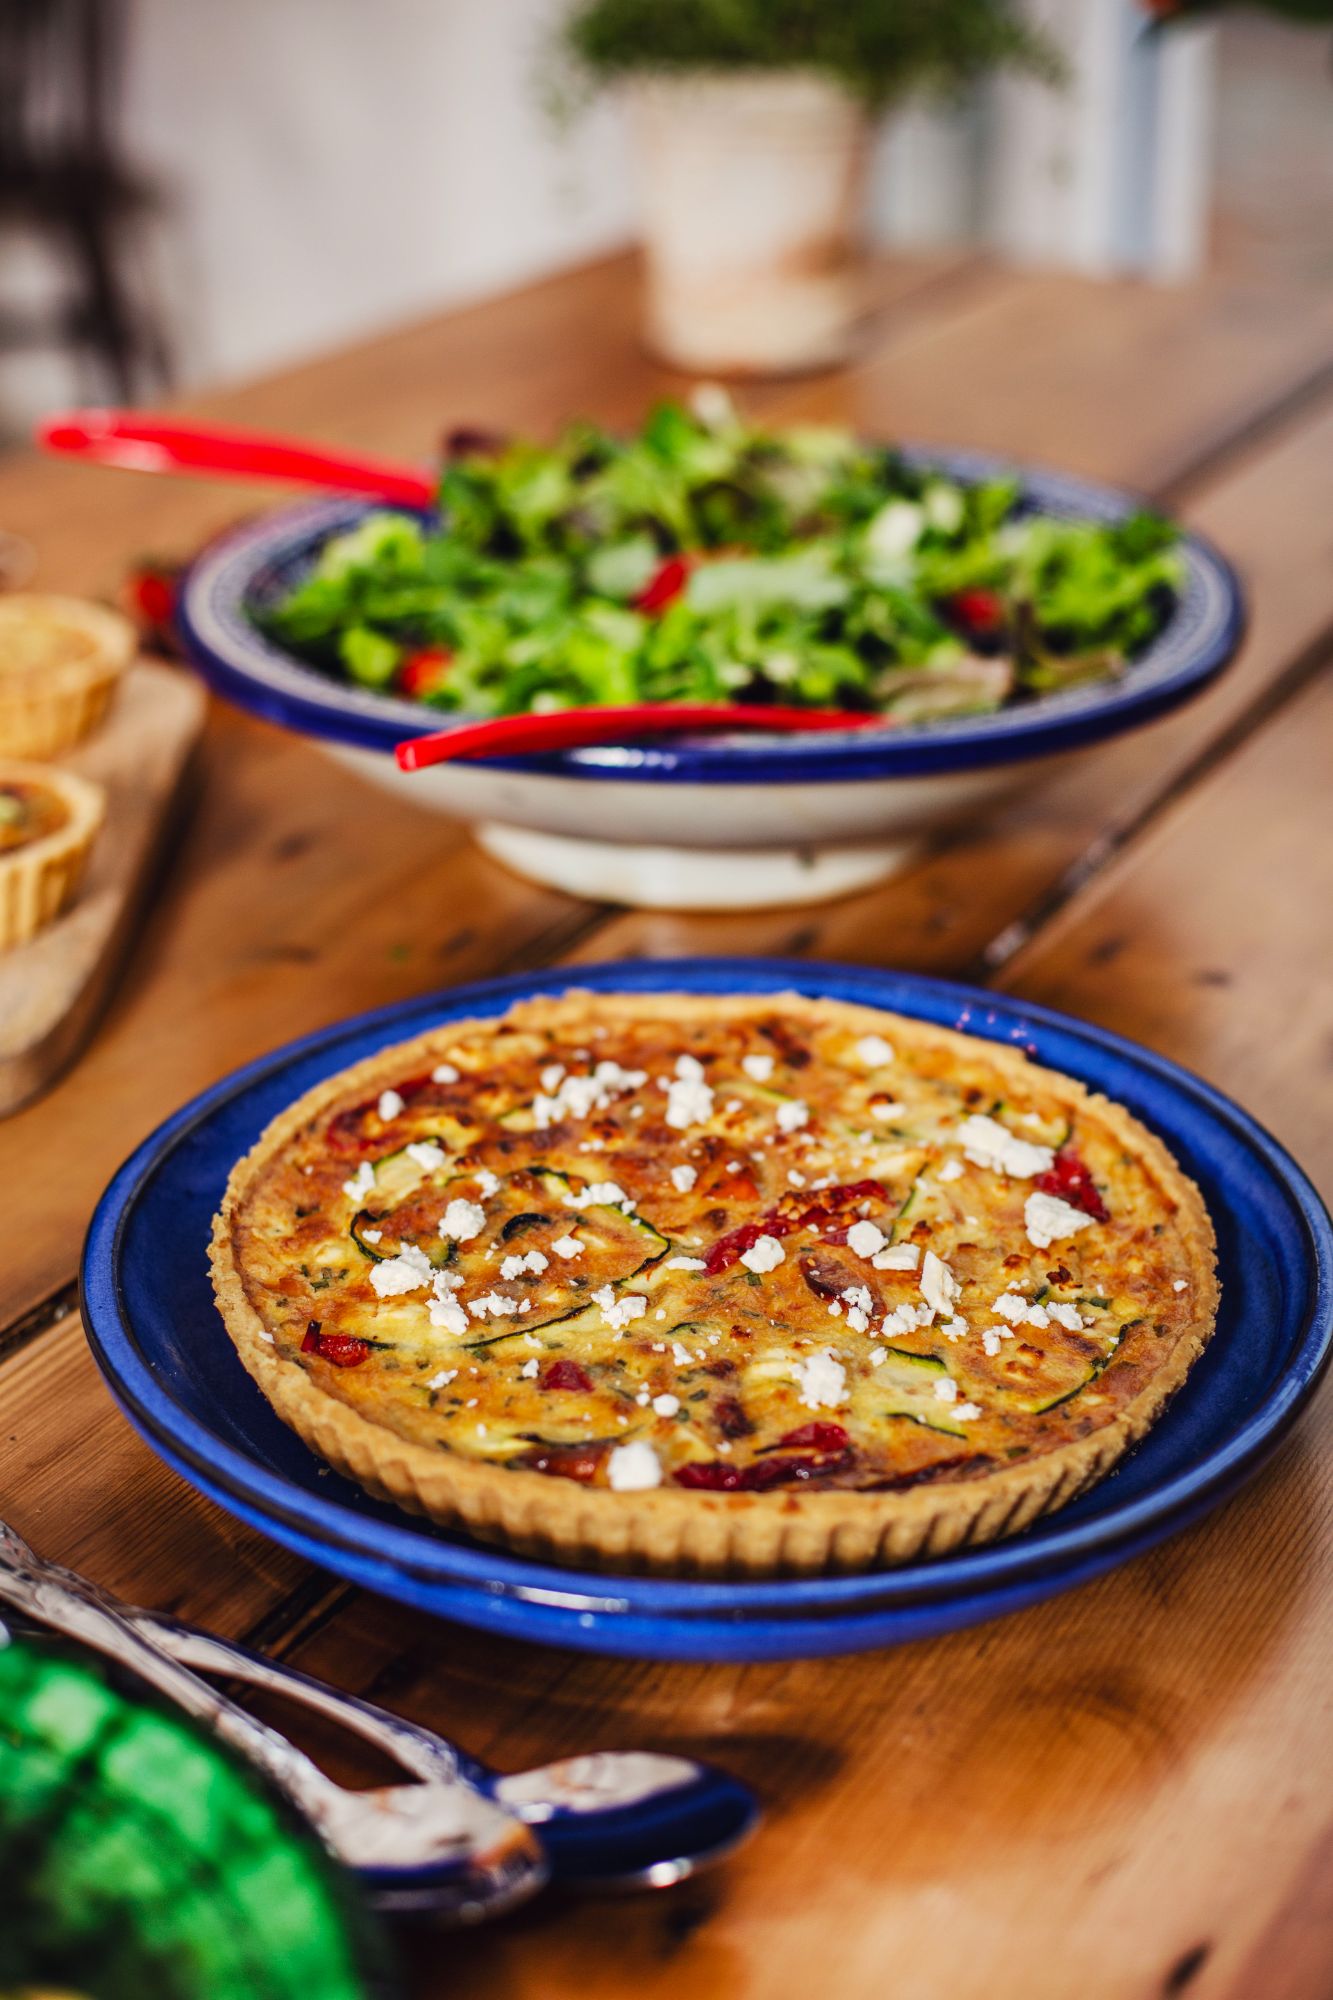 Roasted Red Pepper, Courgette & Feta Quiche